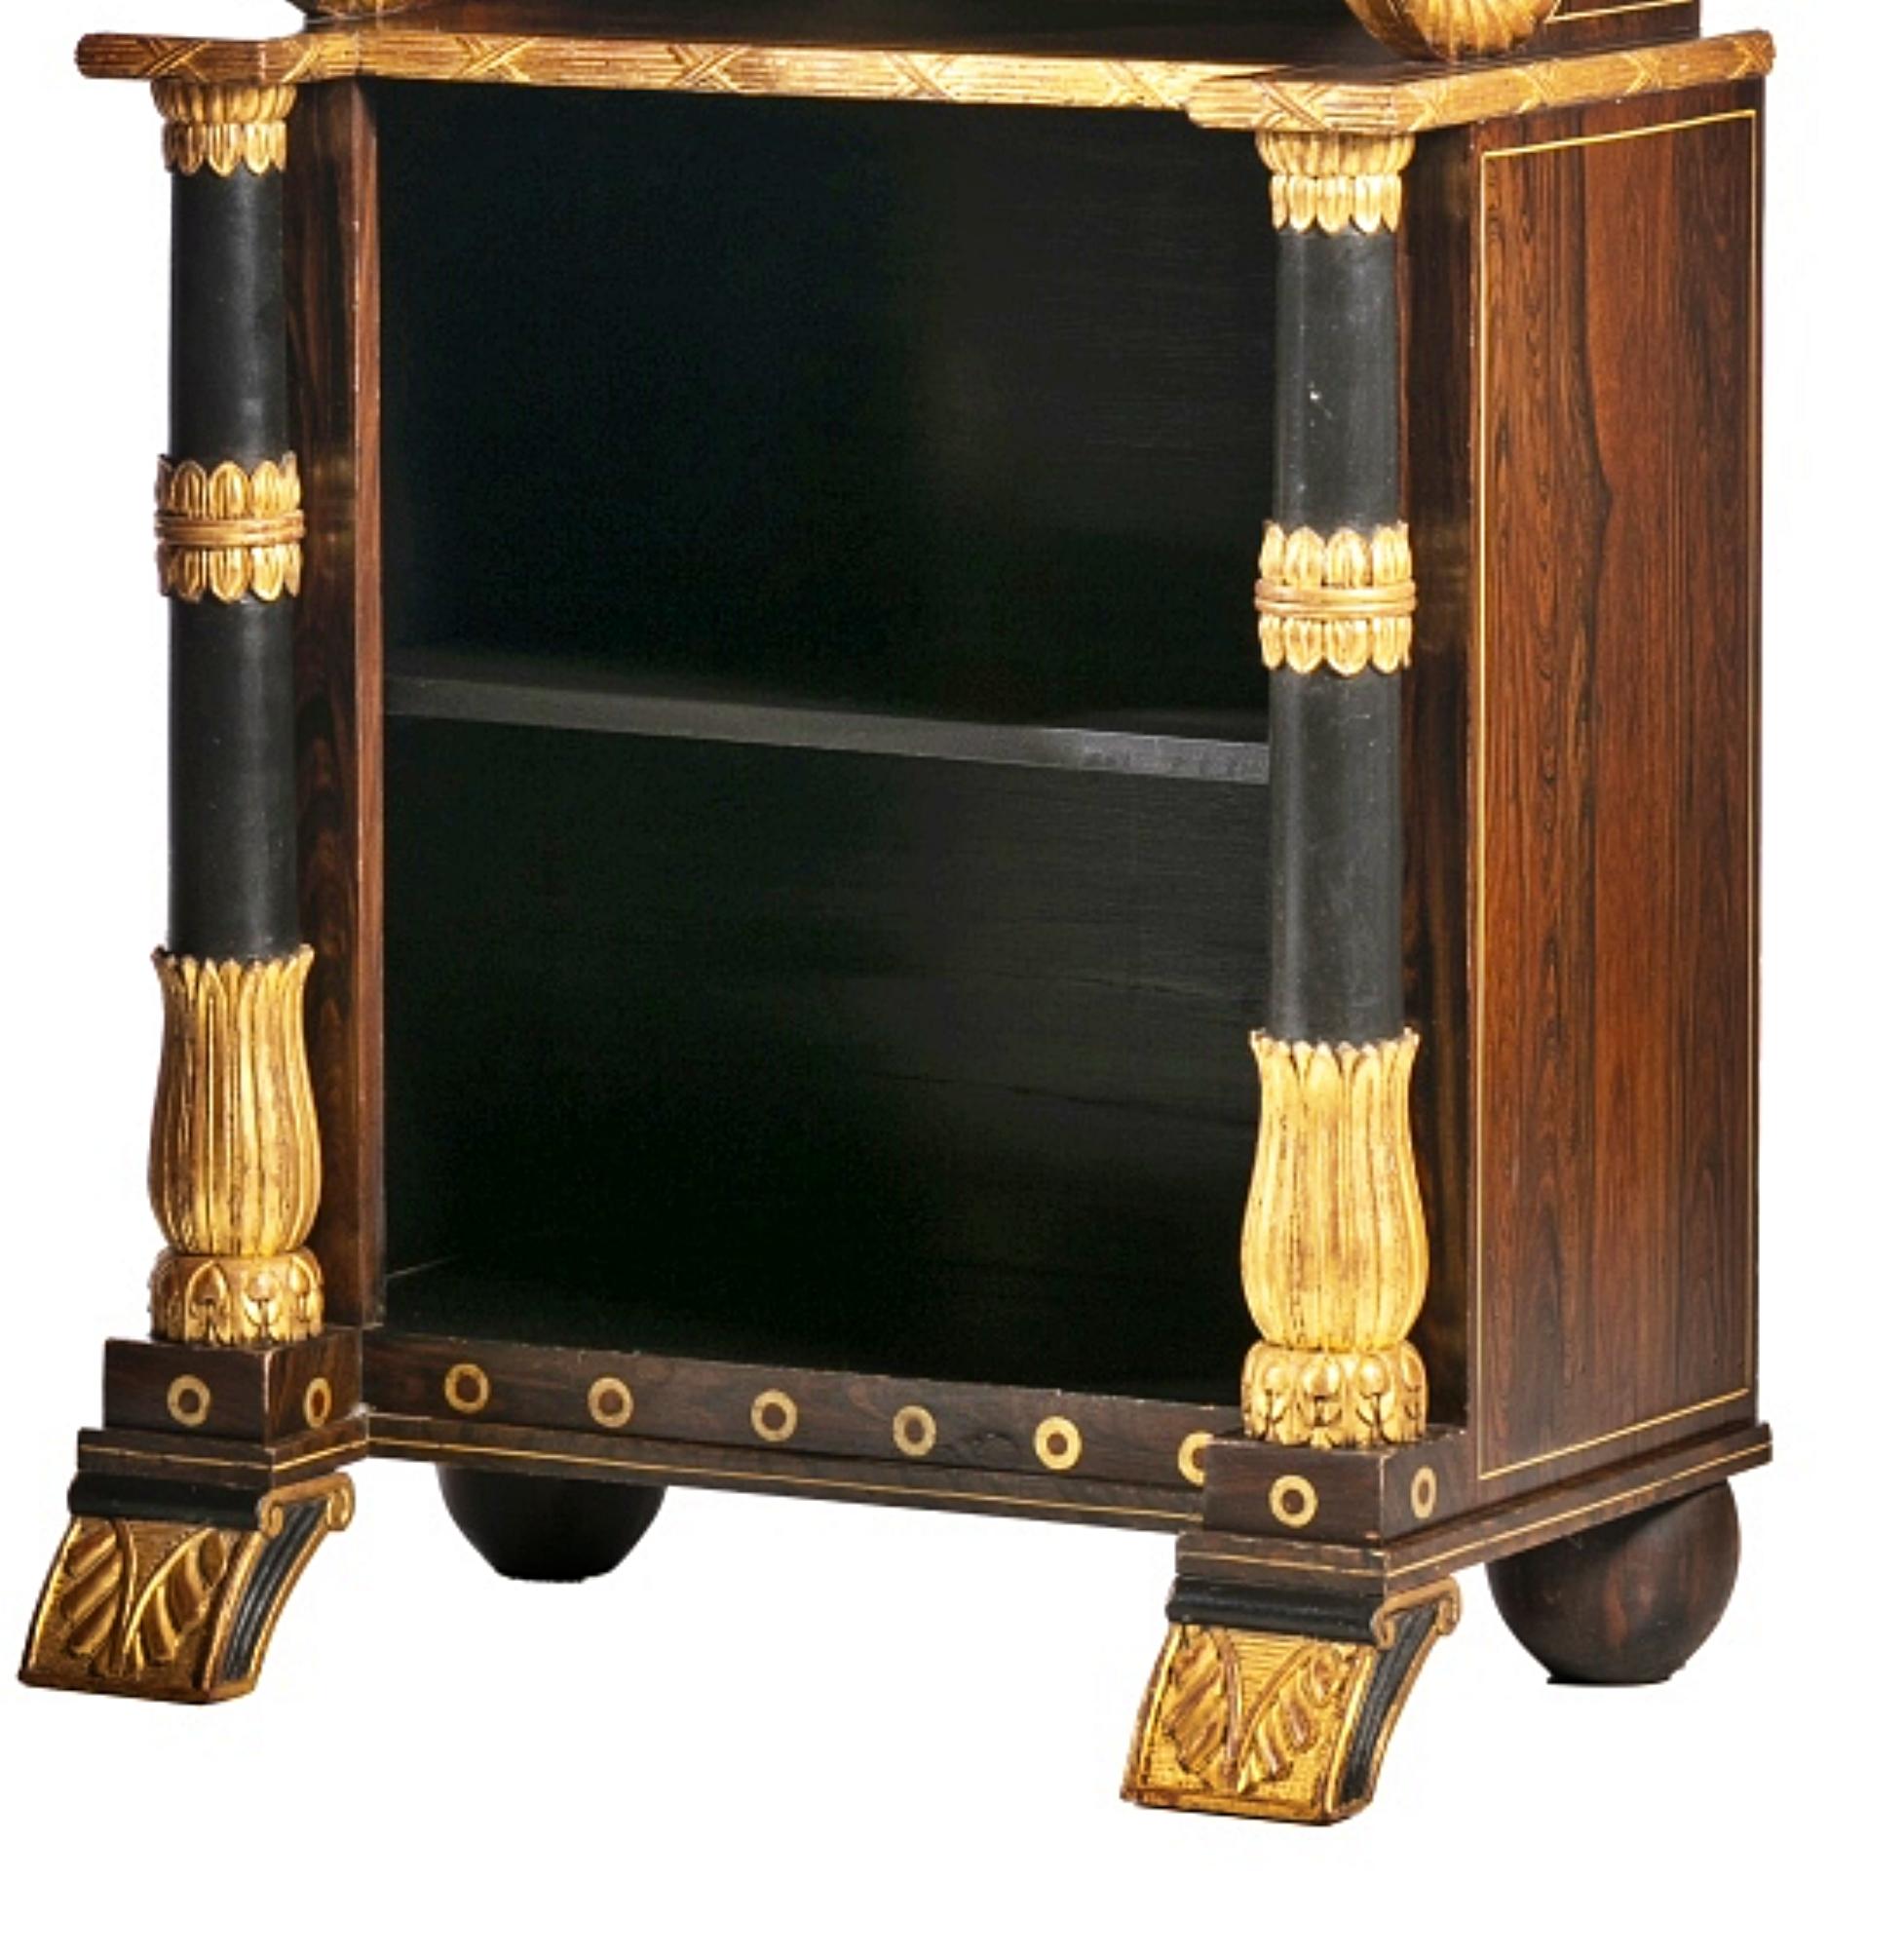 IMPORTANT PAIR OF EMPIRE SHELVES Napoleon III 19th century

French, 19th century 19th century, 
clad in rosewood wood, 
with three shelves, 
gilded carvings. 
Small defects. 
Dim.: 165 x 78 x 59 cm.
very good condition